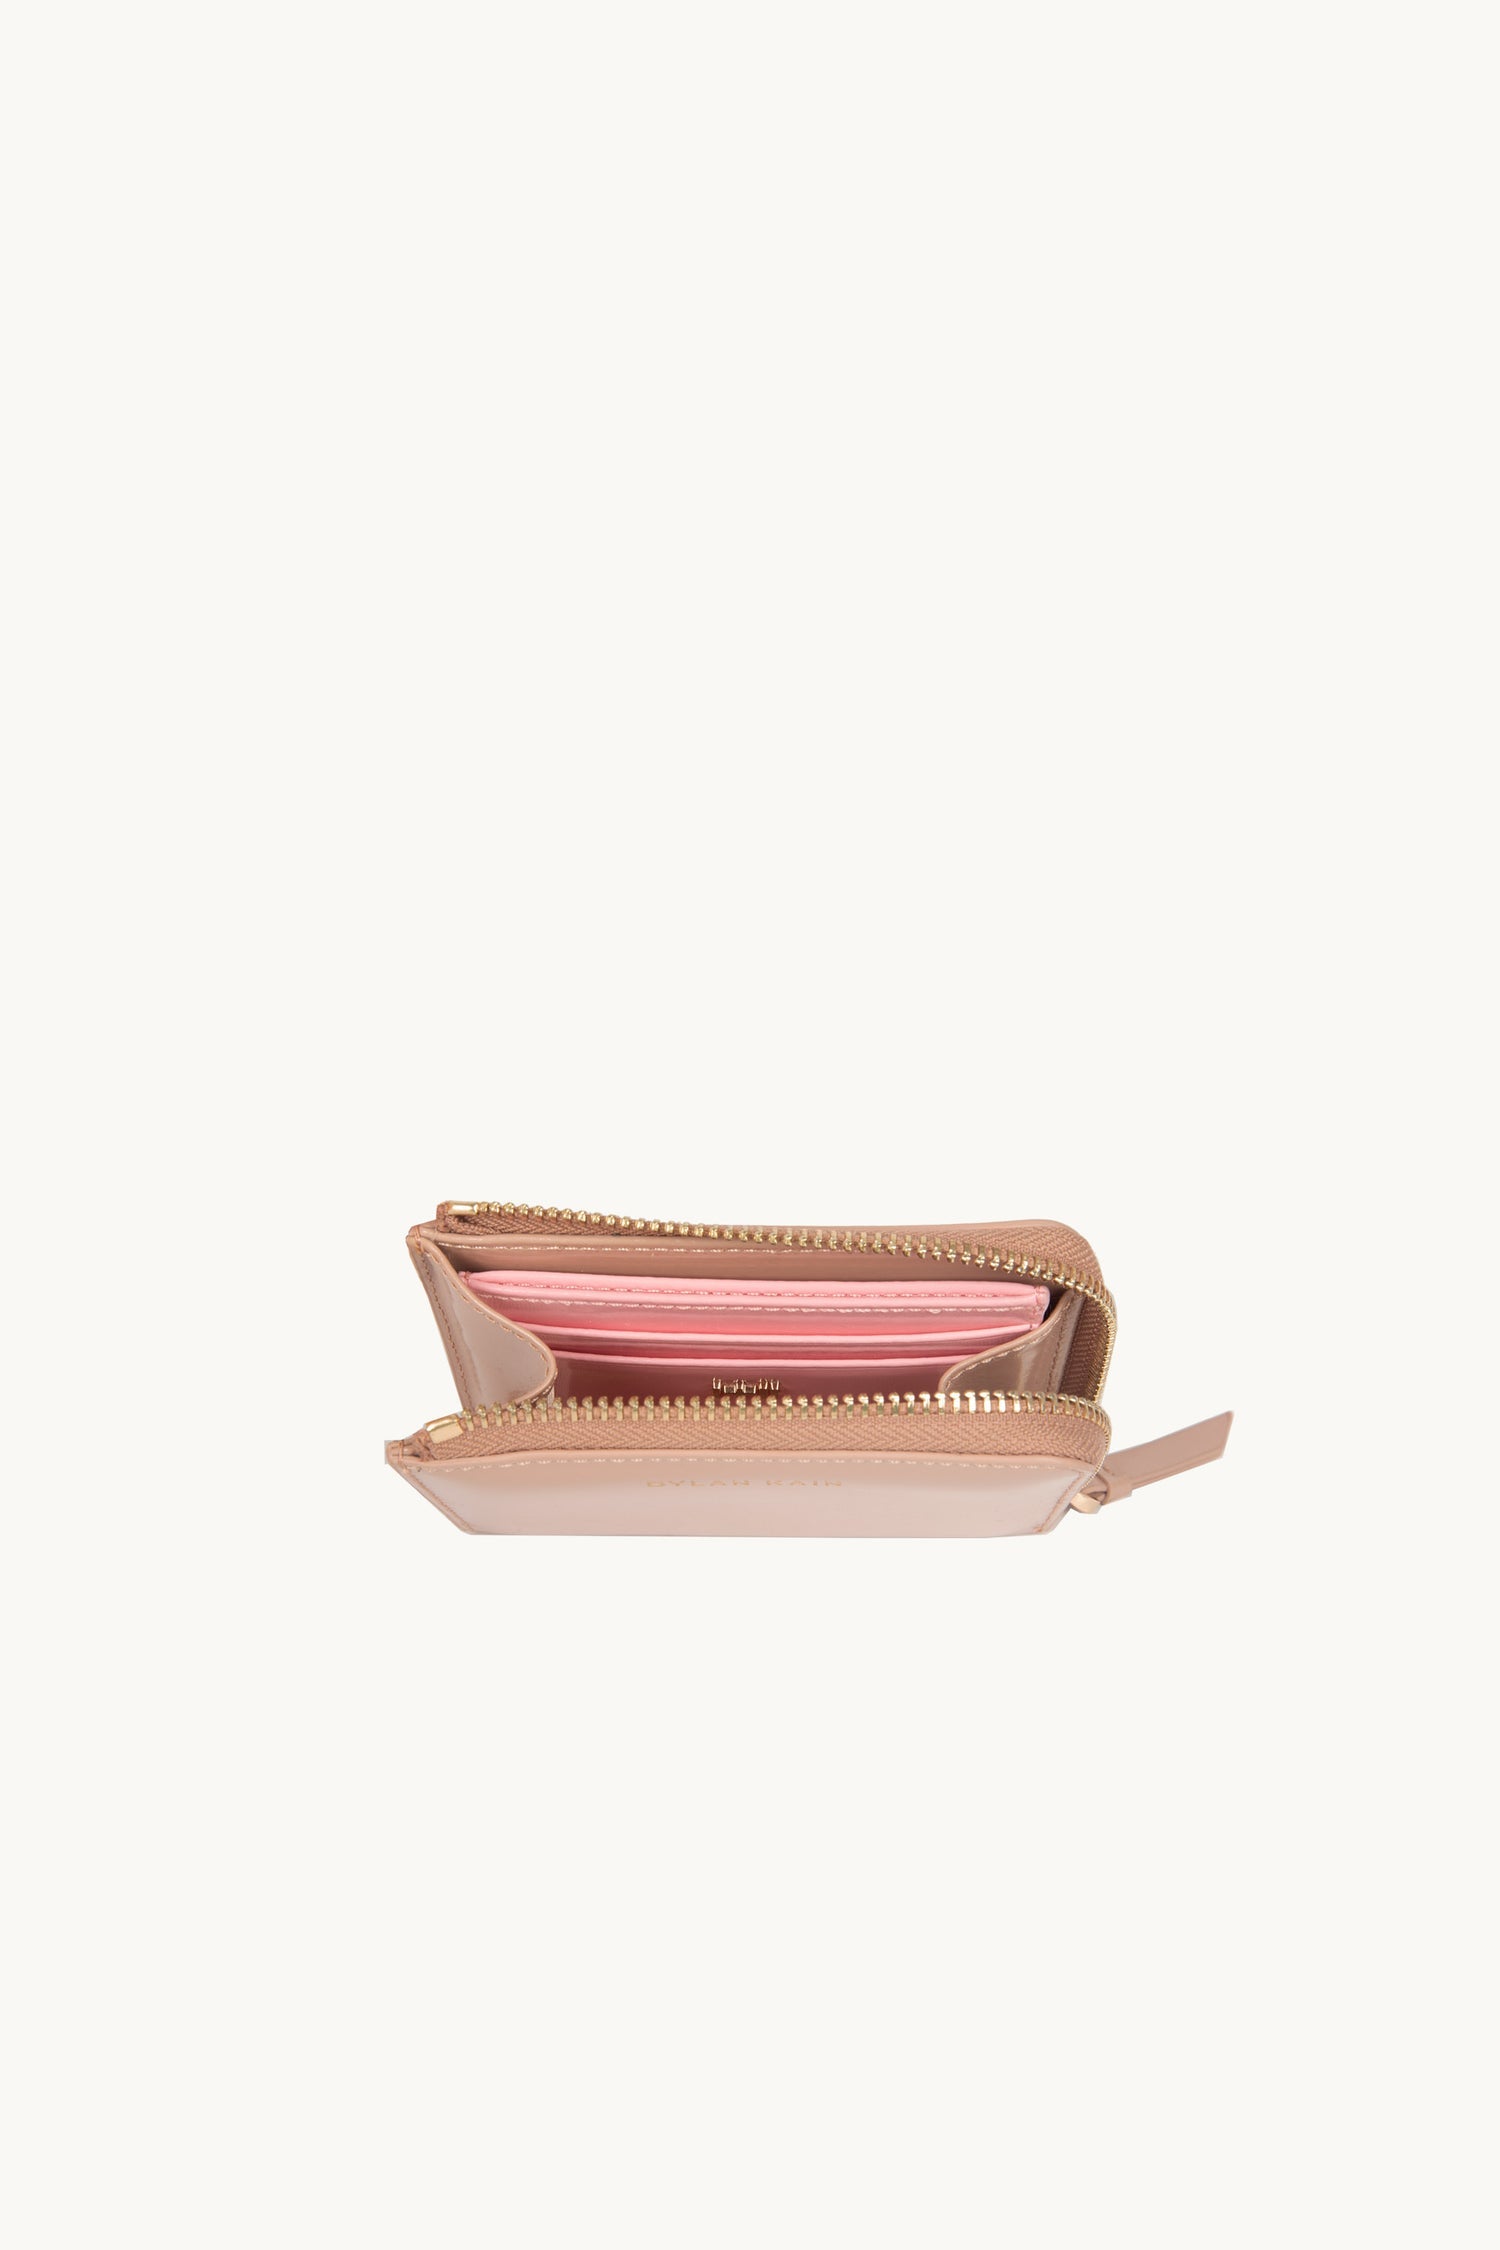 Dylan Kain The Selby Patent Card Set Fawn Light Gold / Pink